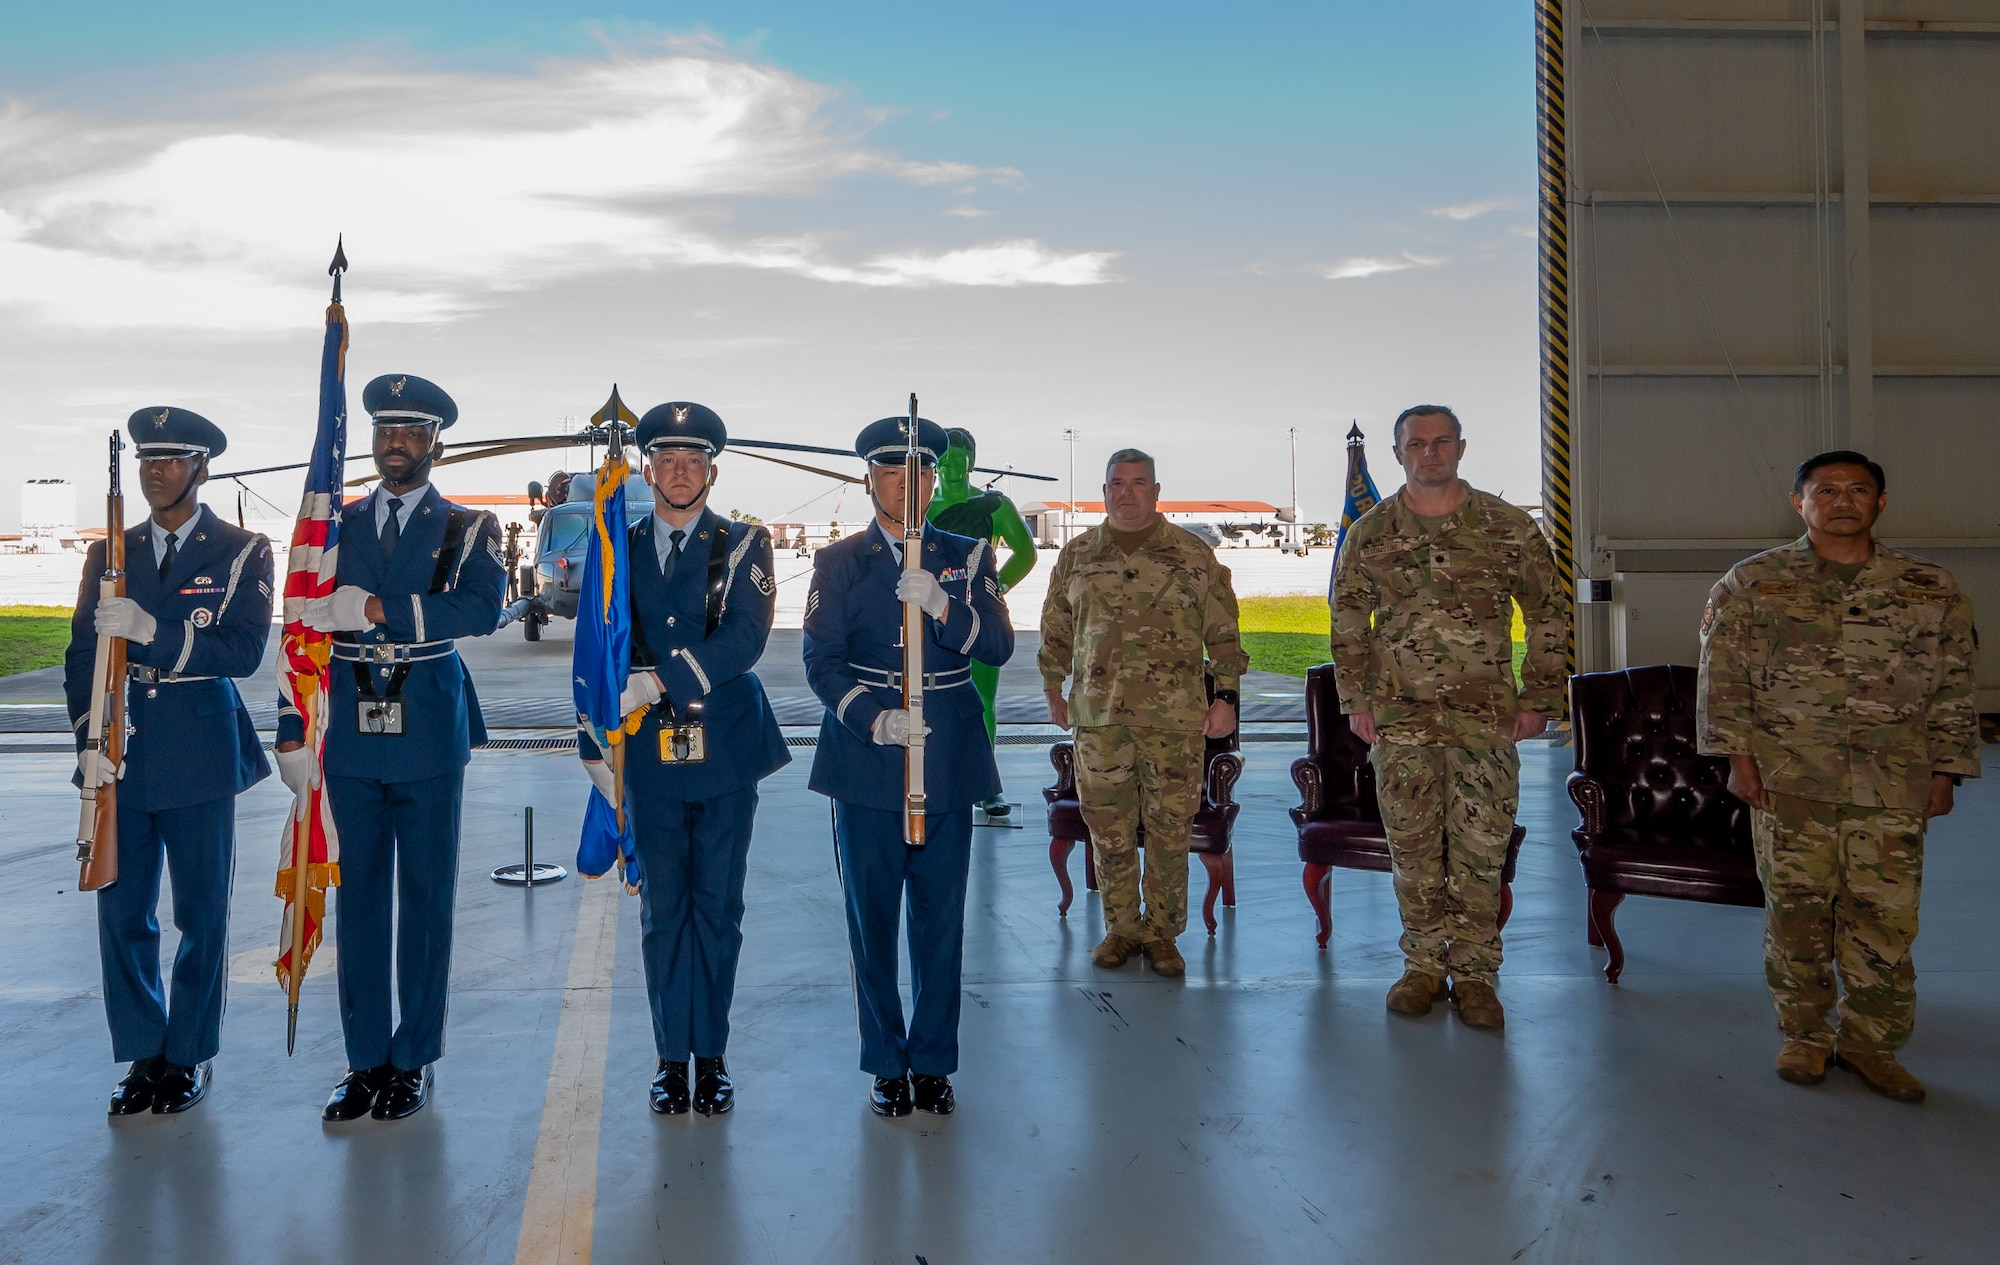 301st Rescue Squadron welcomes new commander